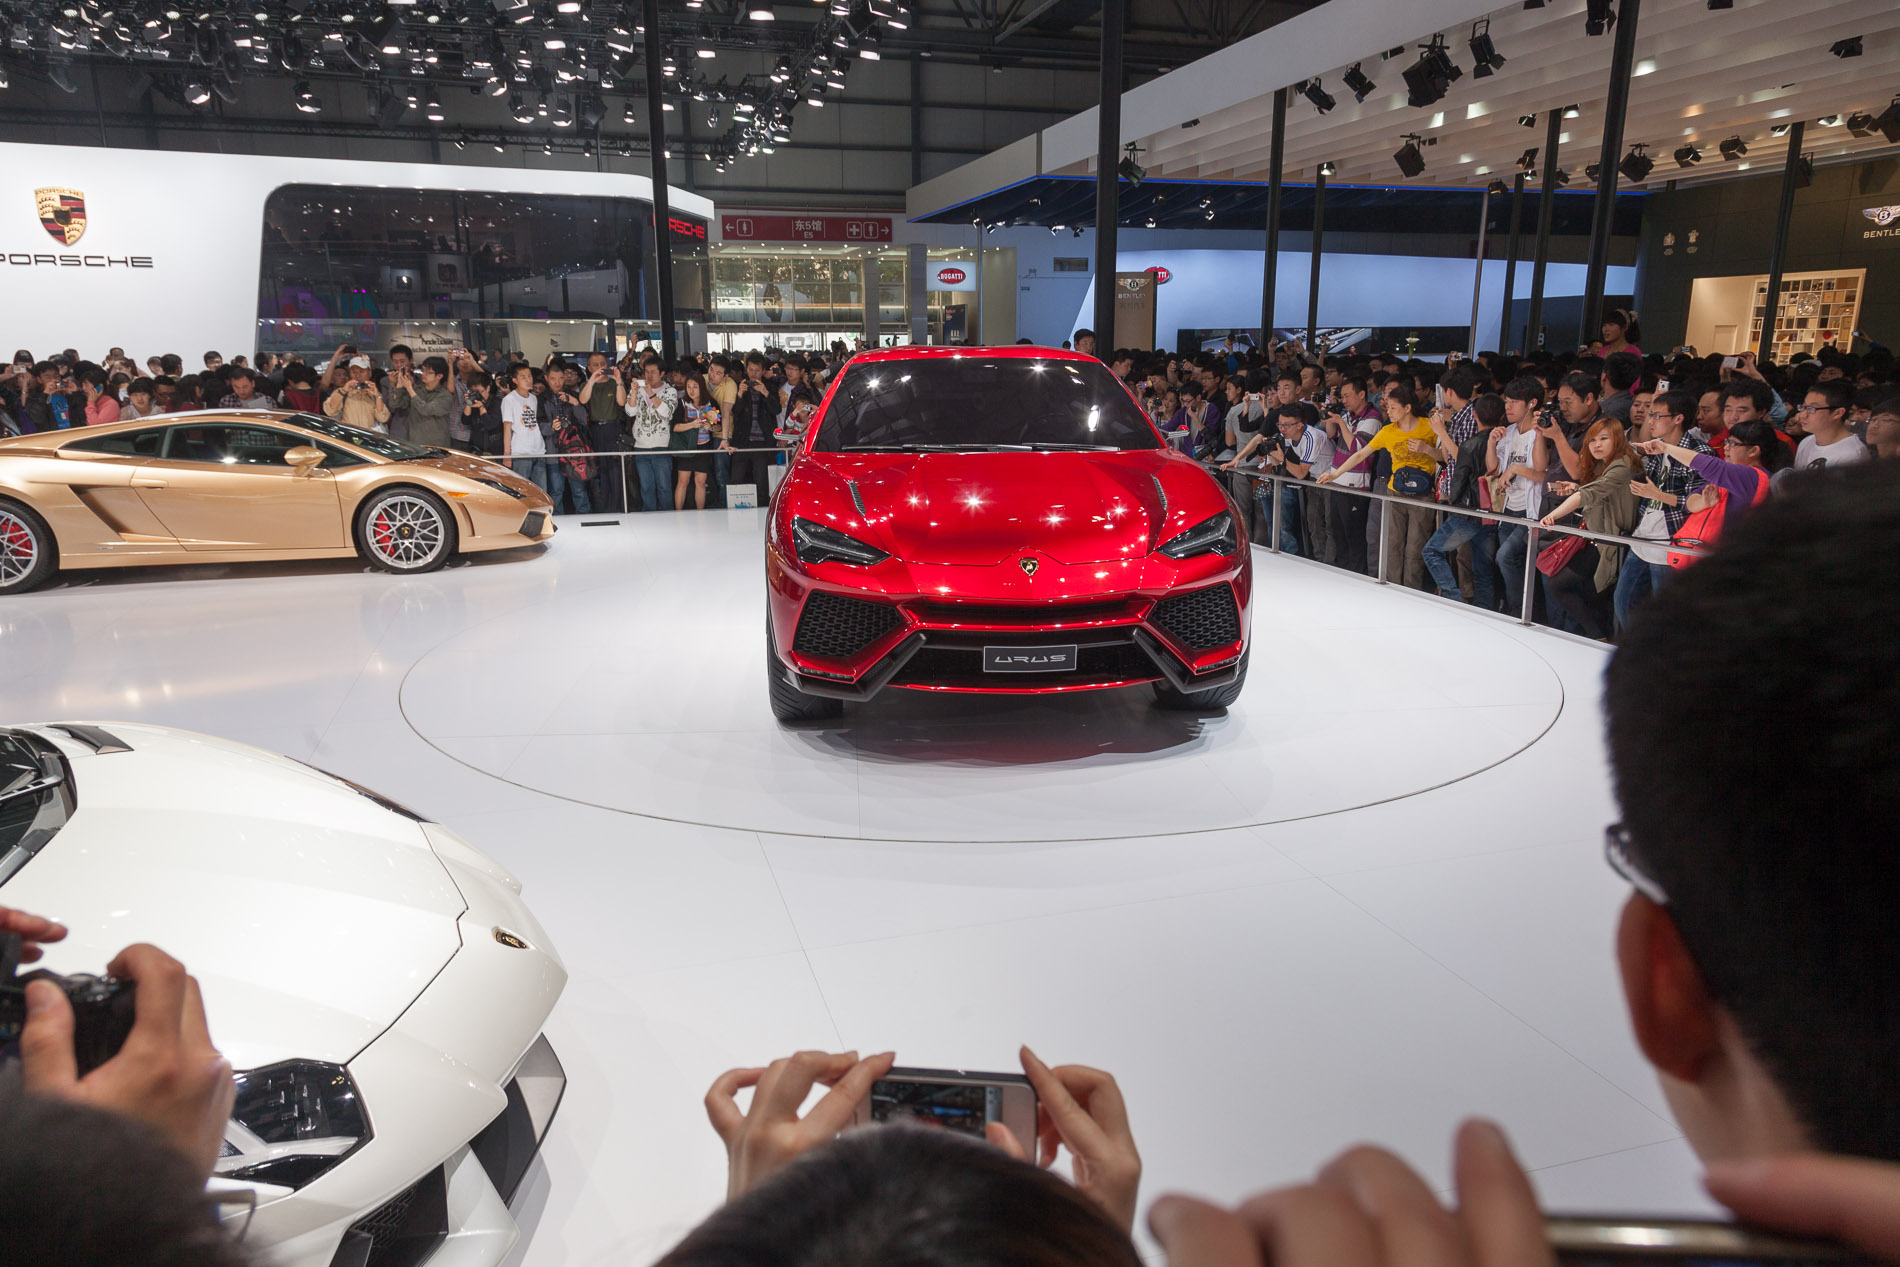 Beijing Motor Show was crowded and just a little desperate. Manufactures wanted to impress. Coming so close after Geneva there were only a handful of new releases like Urus by Lamborghini.